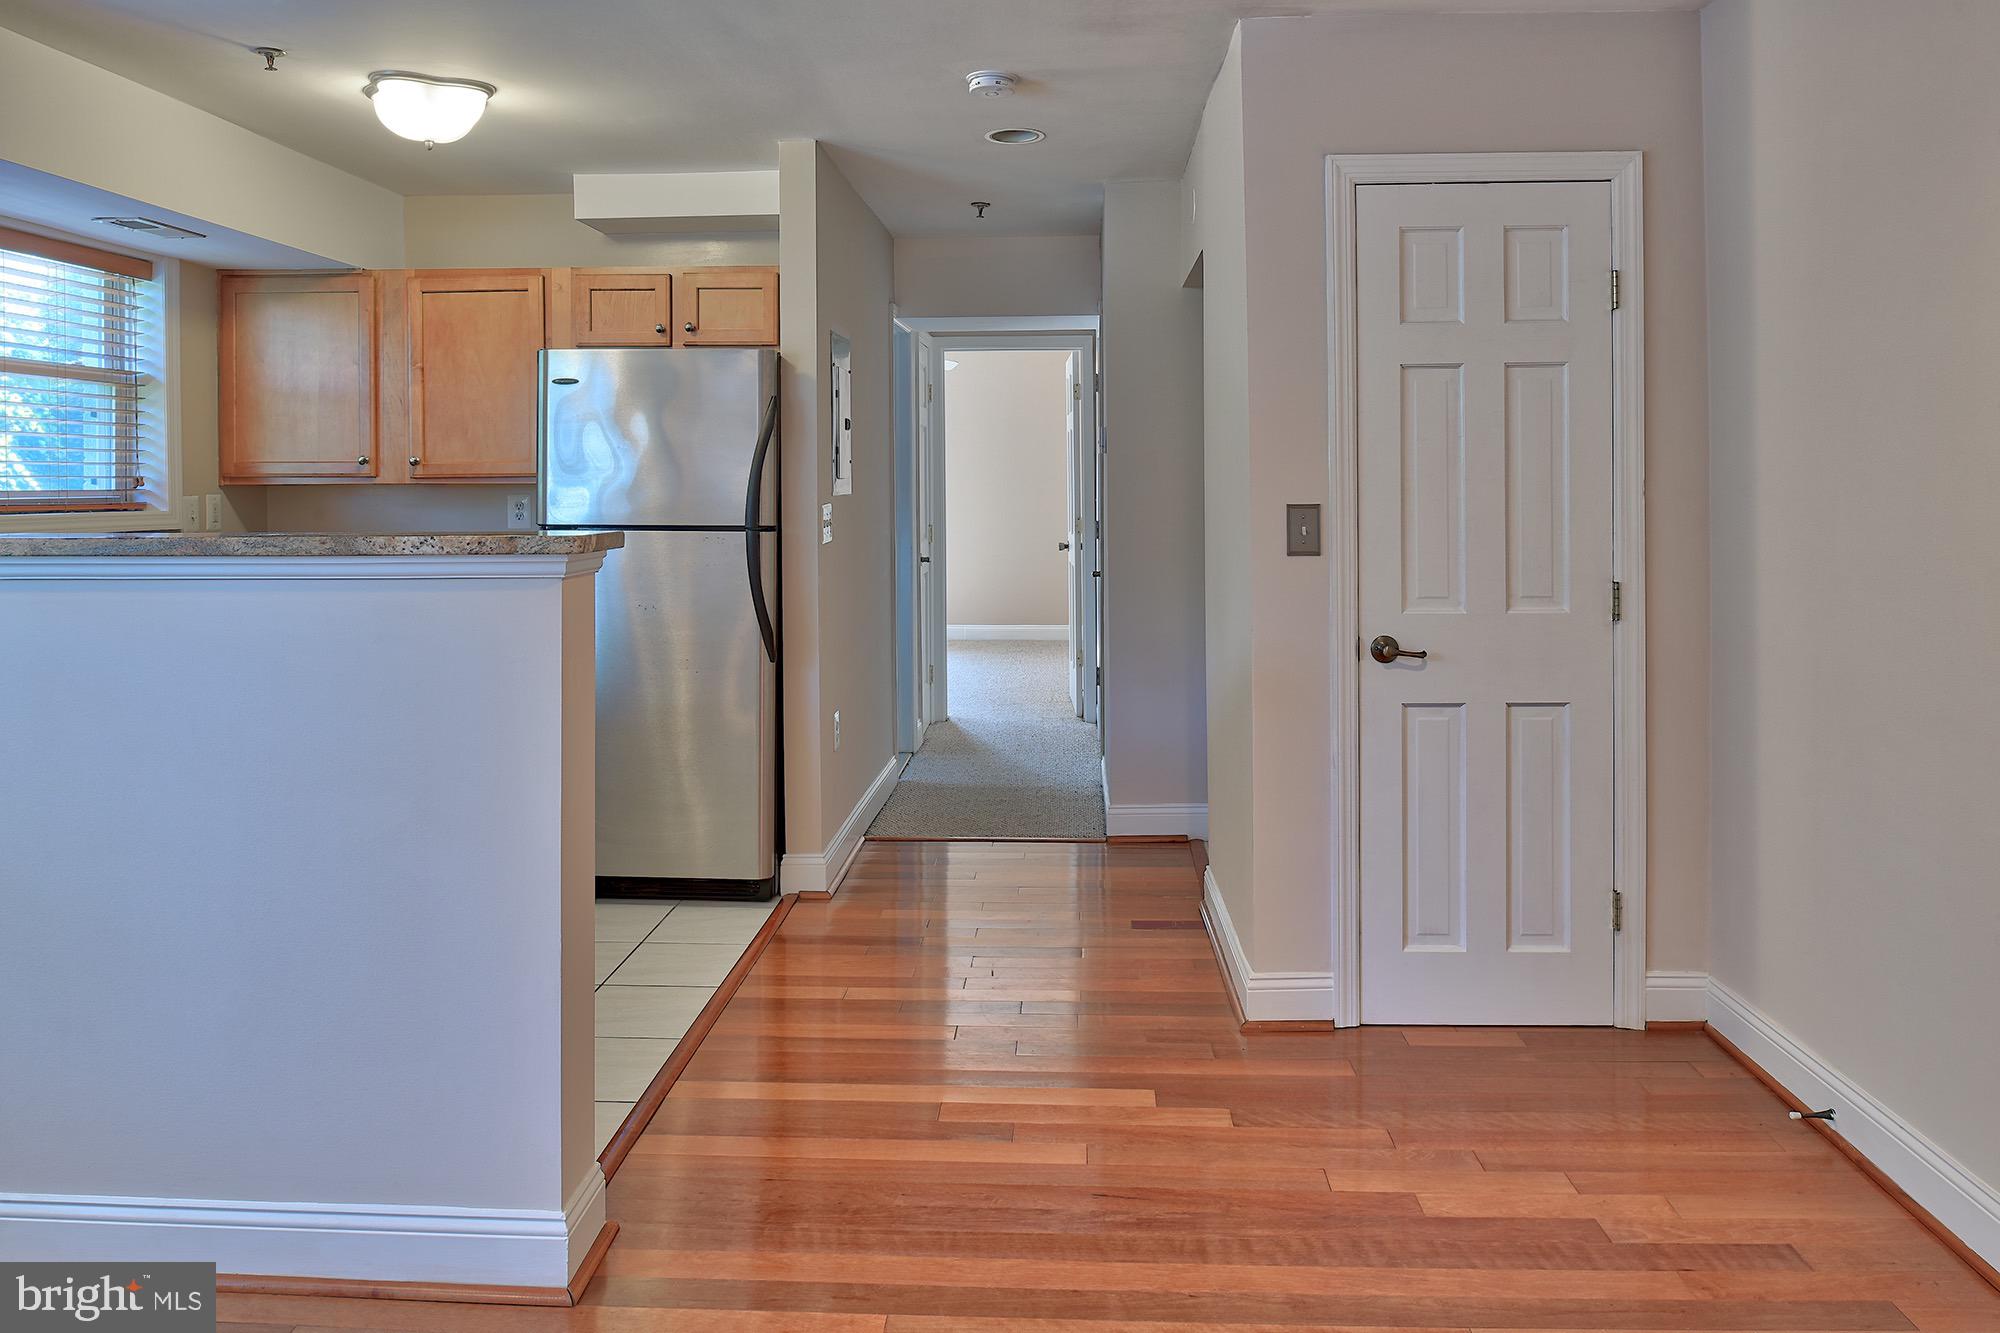 a view of a refrigerator in kitchen and wooden floor